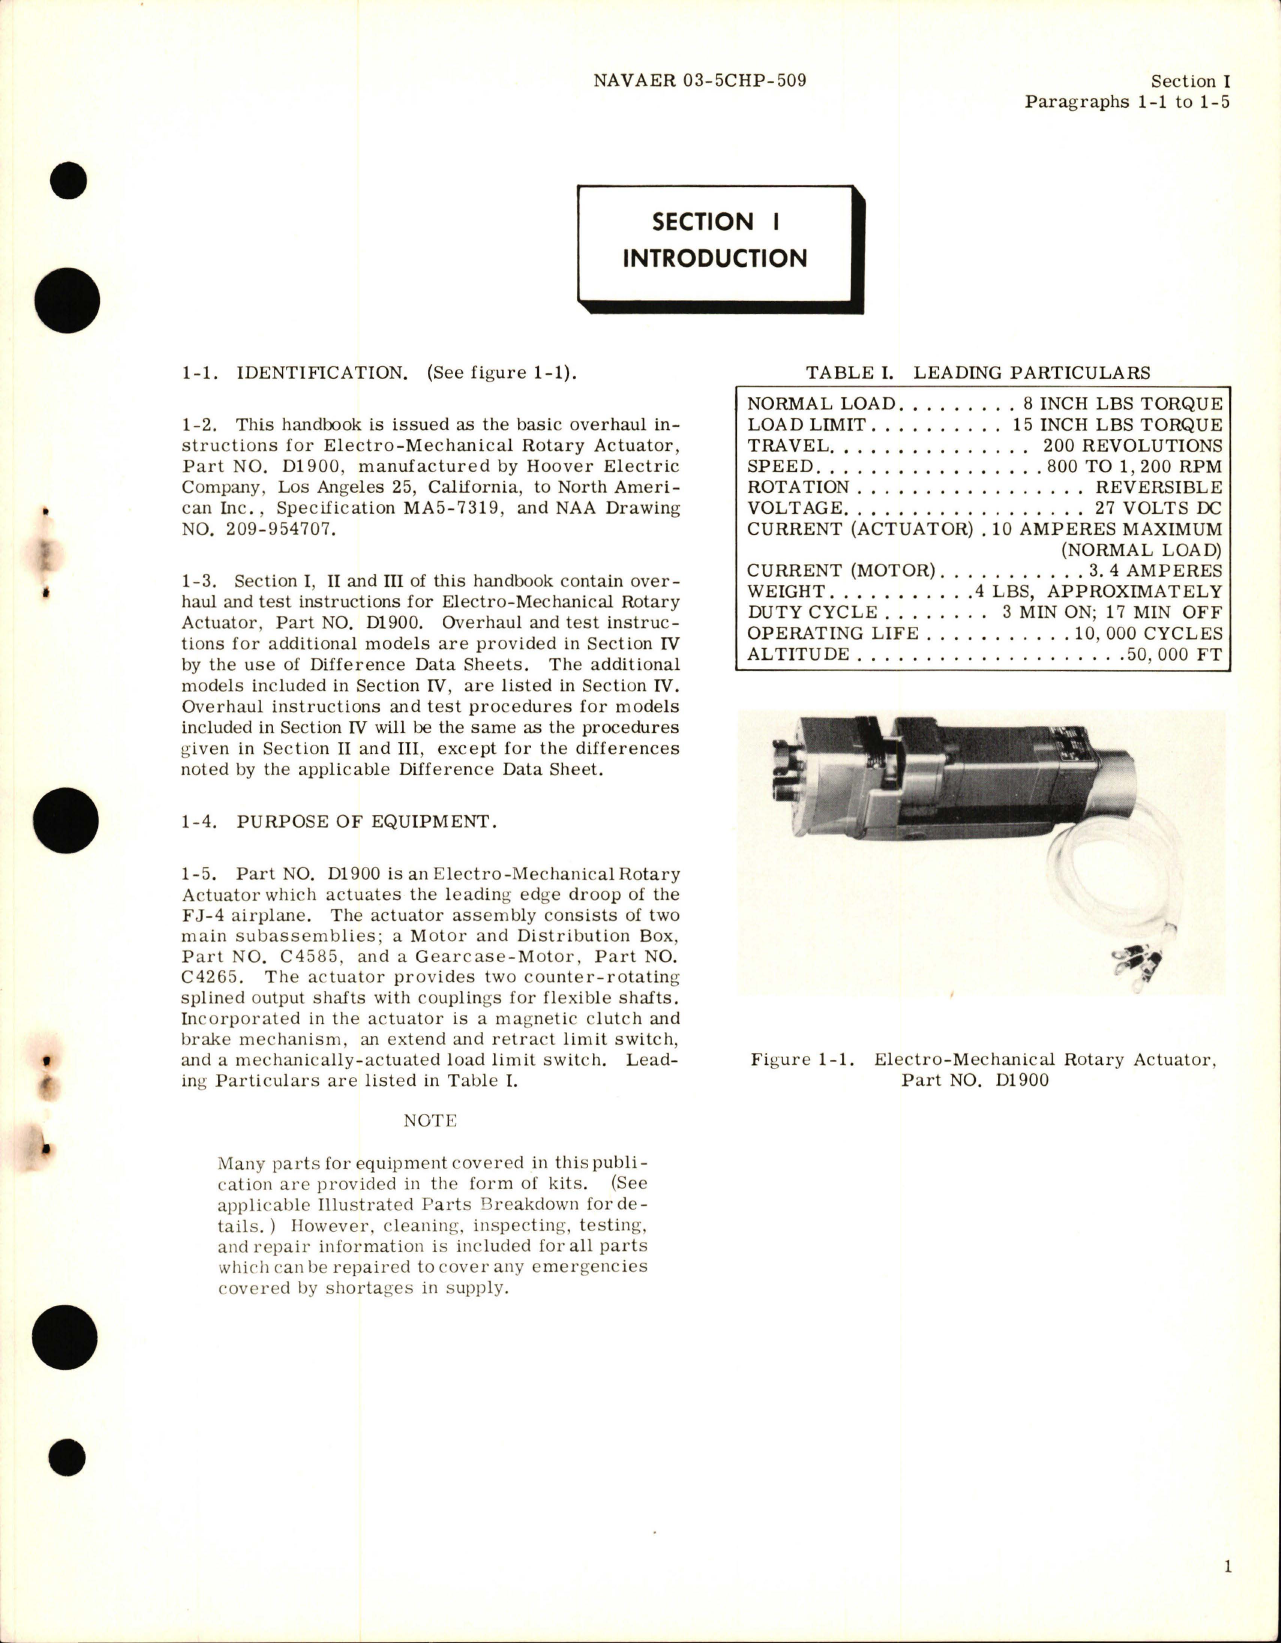 Sample page 5 from AirCorps Library document: Overhaul Instructions for Electro-Mechanical Rotary Actuator Parts D1900, D1900-2, D1900-3 (Hoover) 